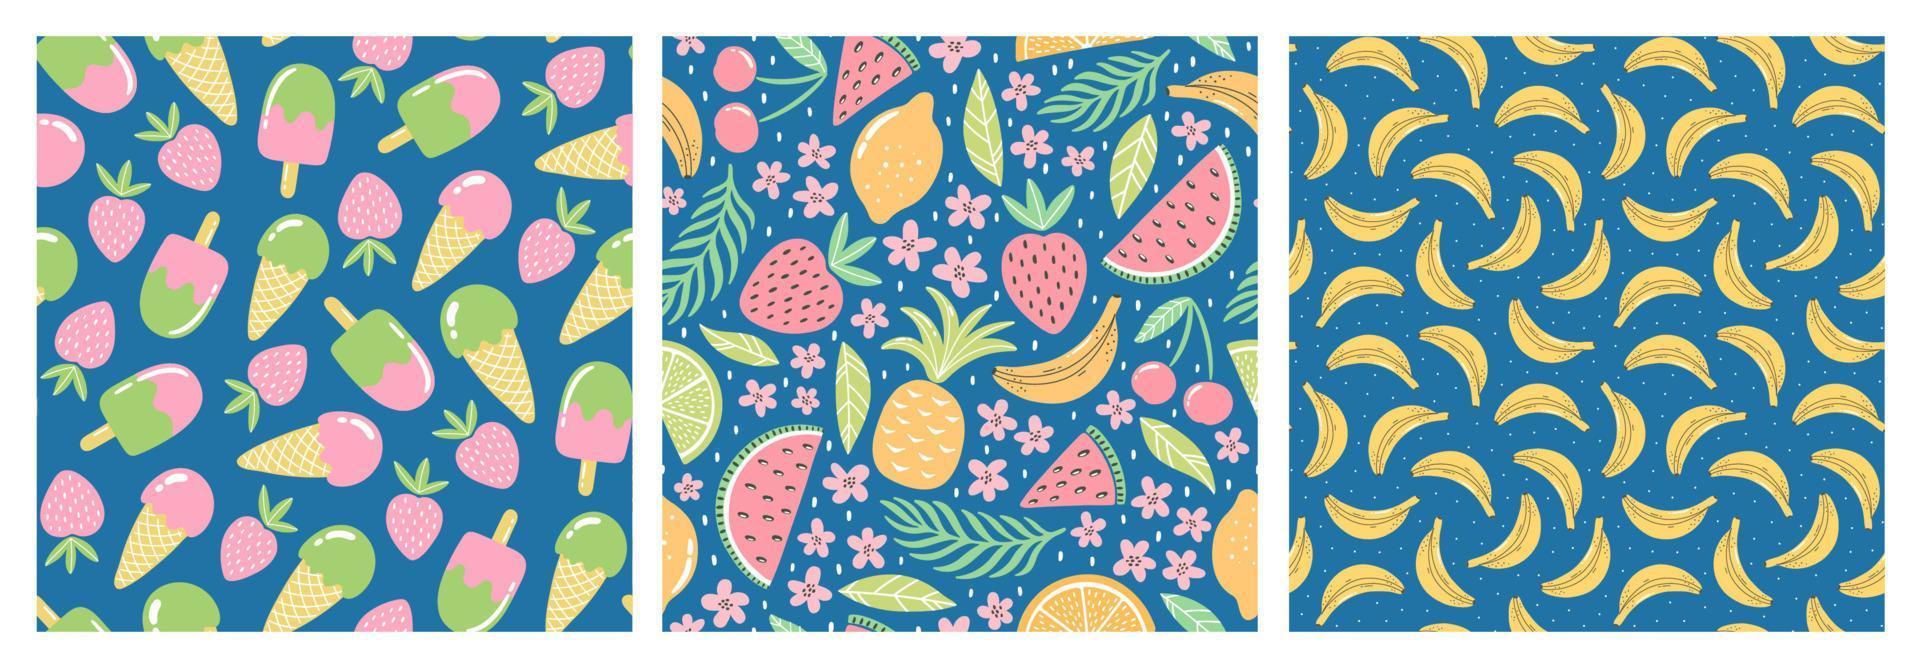 Set of seamless patterns with colorful fruits and sweets for textile design. Summer background in bright colors. Hand-drawn trendy vector illustrations.